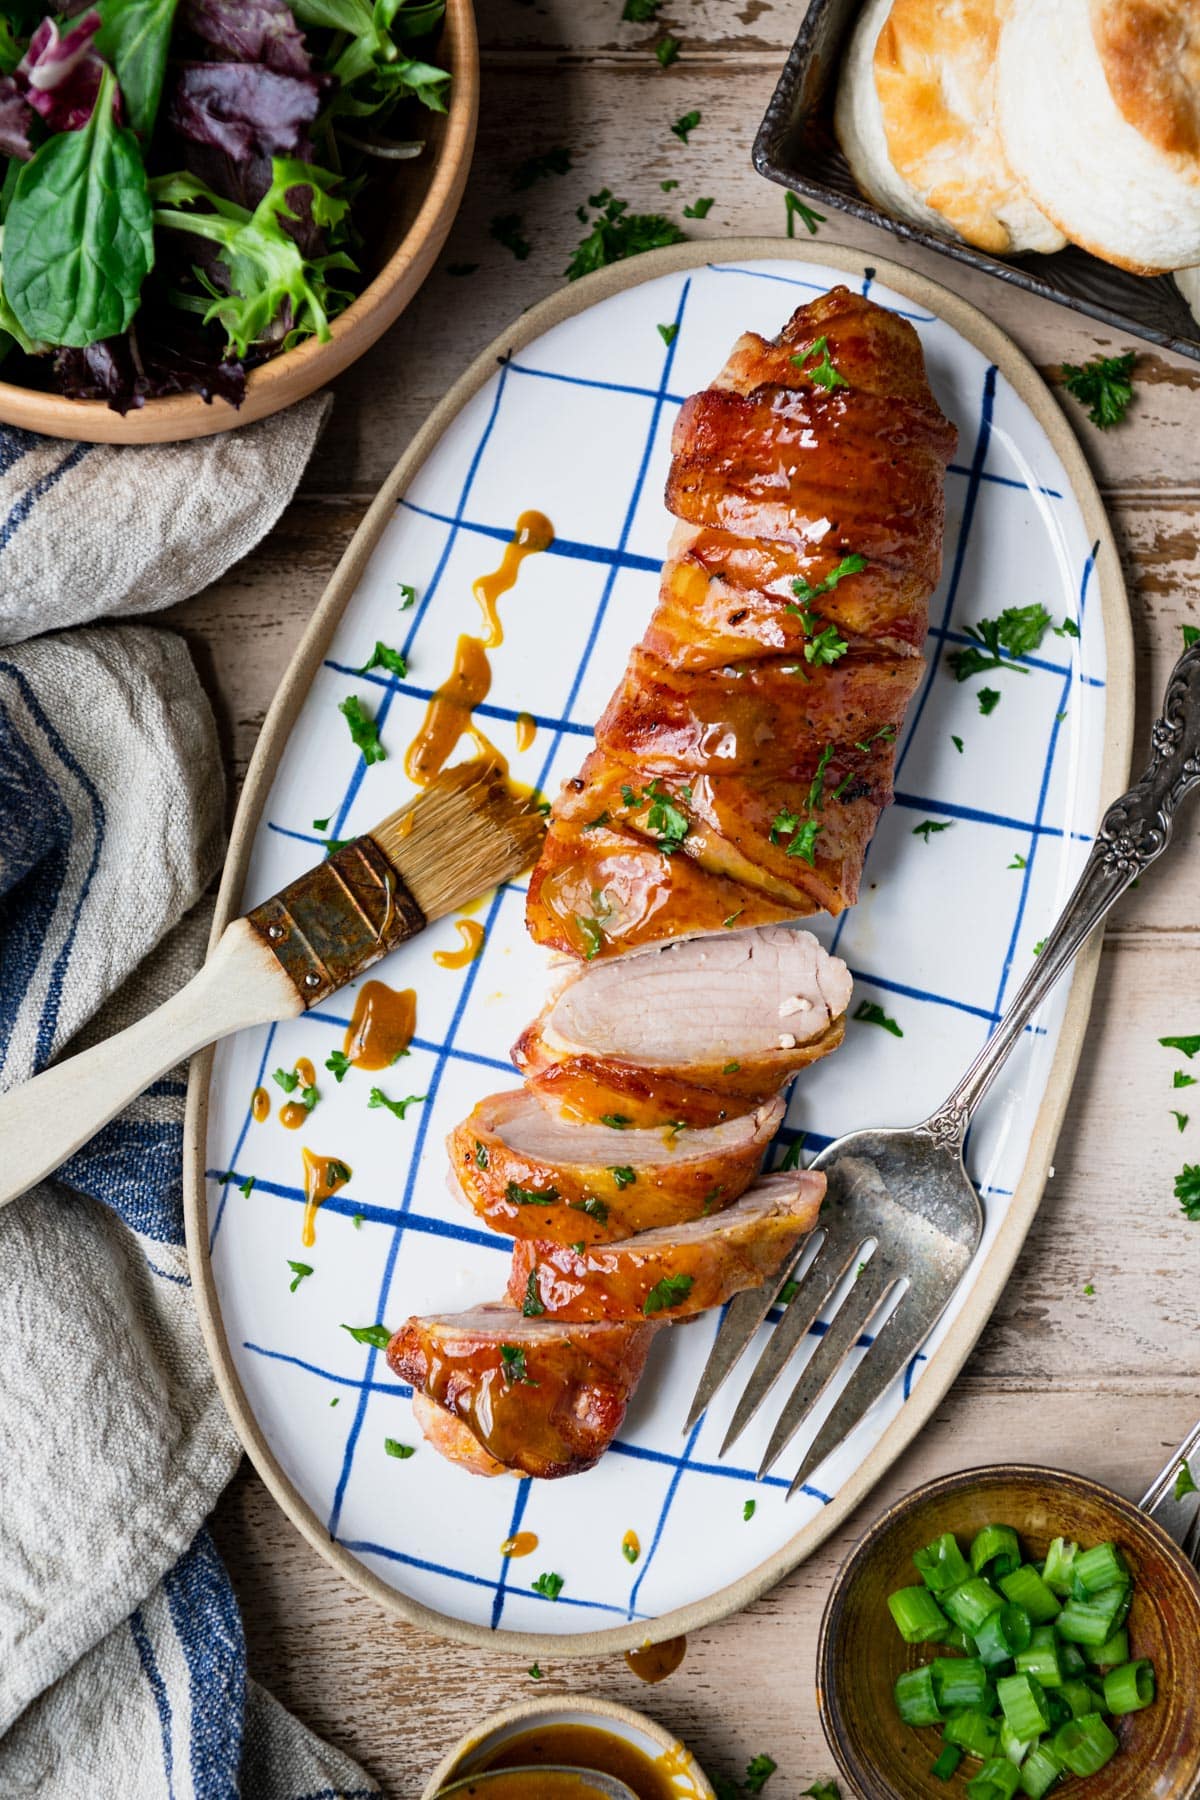 Bacon wrapped pork tenderloin with brown sugar and mustard served on a blue and white tray with fresh parsley.